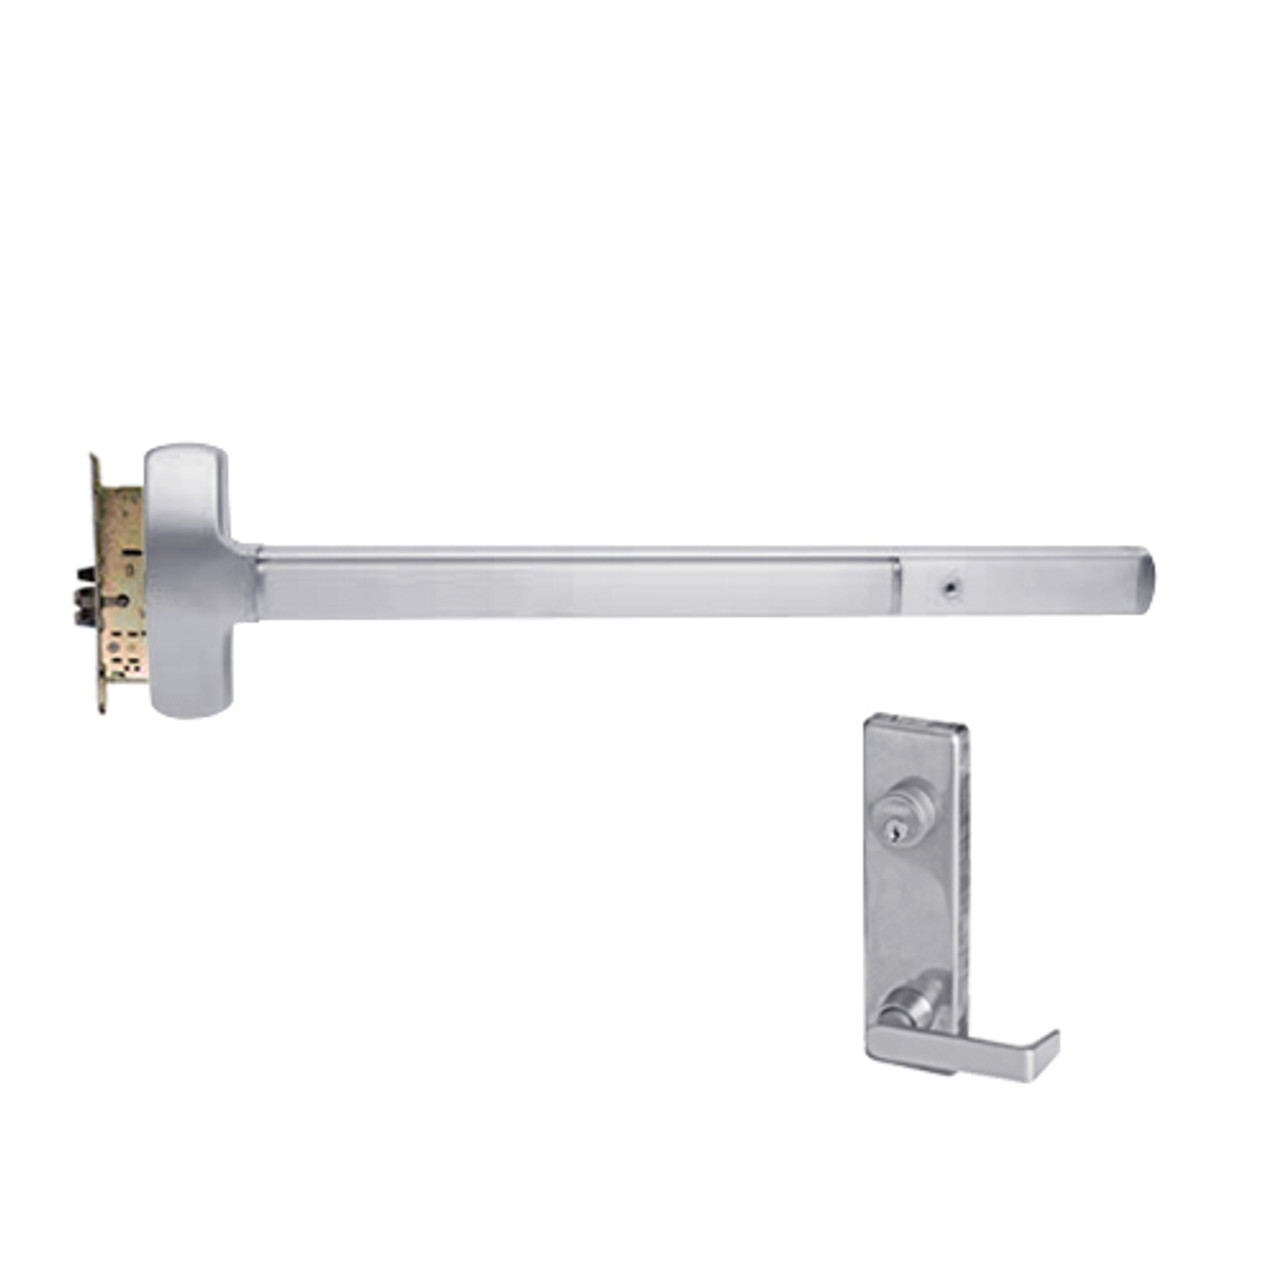 25-M-L-NL-DANE-US32-3-LHR Falcon Exit Device in Polished Stainless Steel